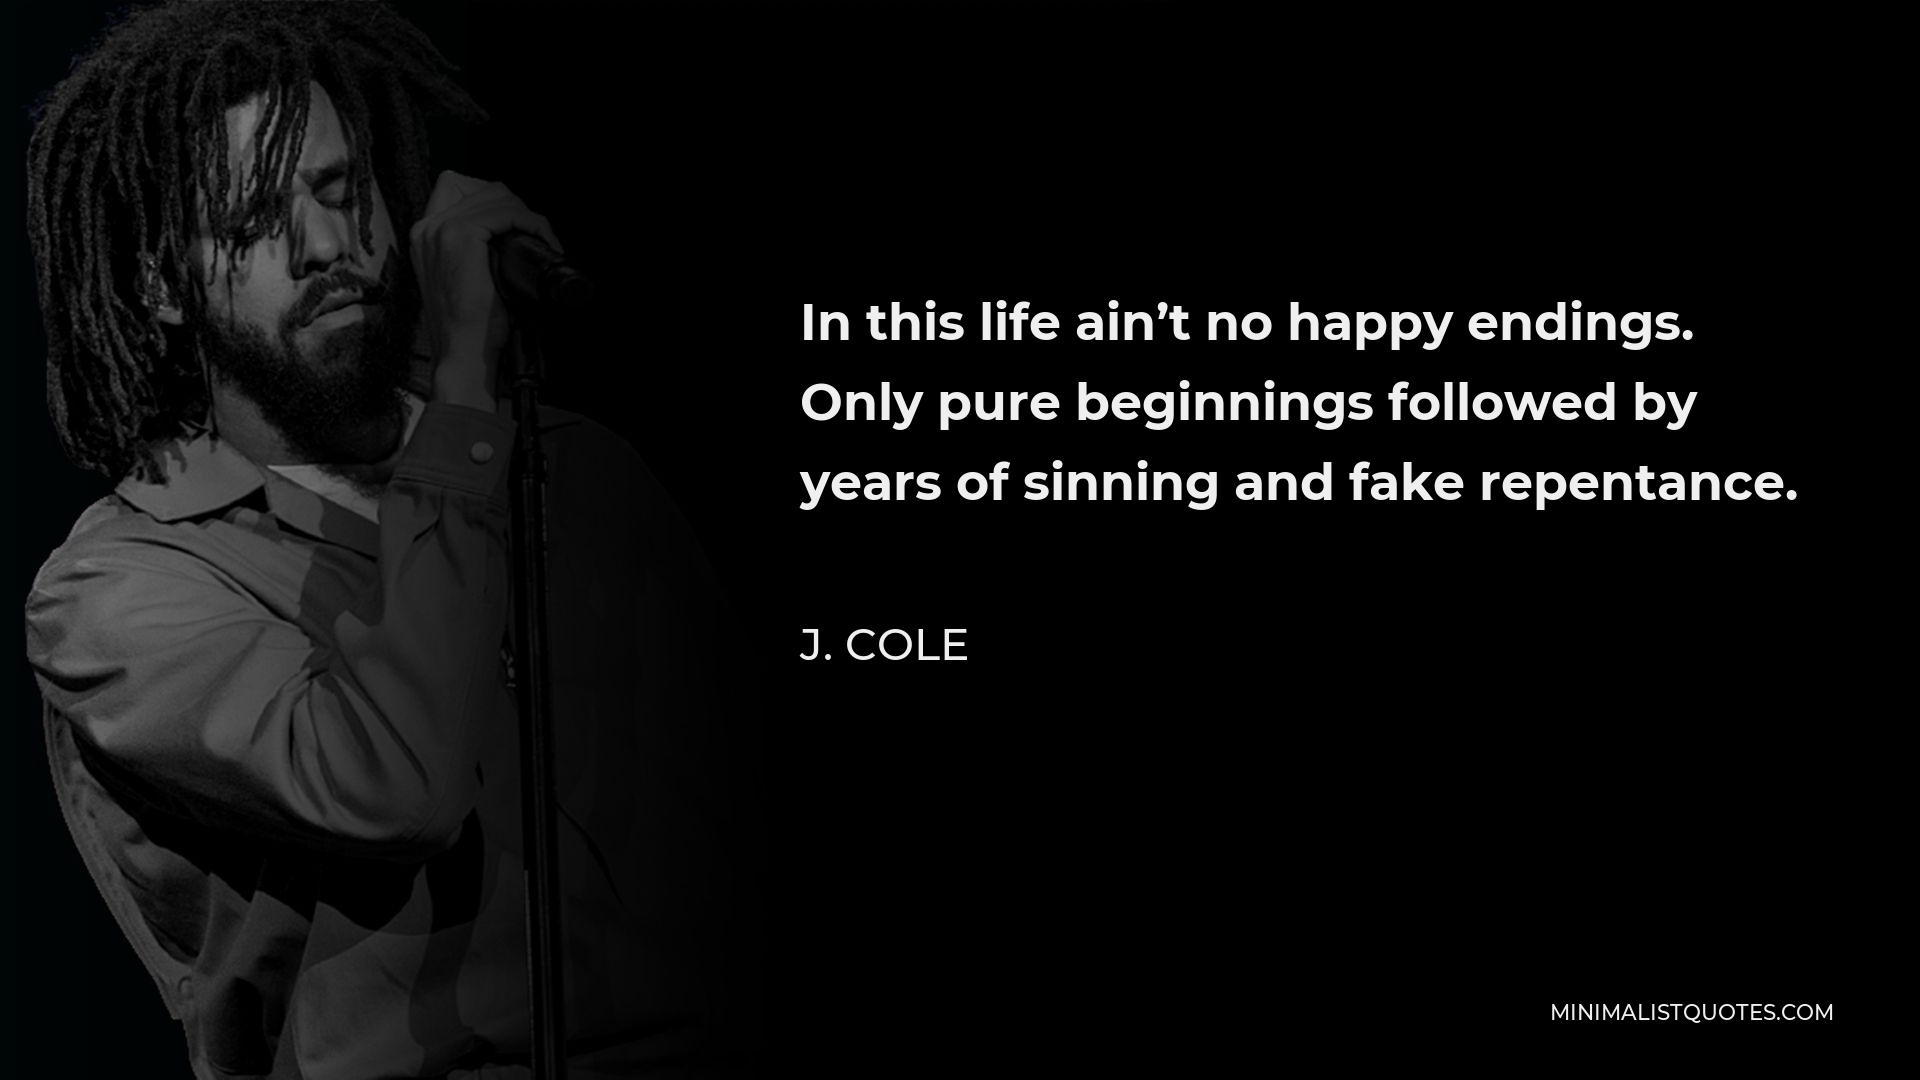 J. Cole Quote - In this life ain’t no happy endings. Only pure beginnings followed by years of sinning and fake repentance.